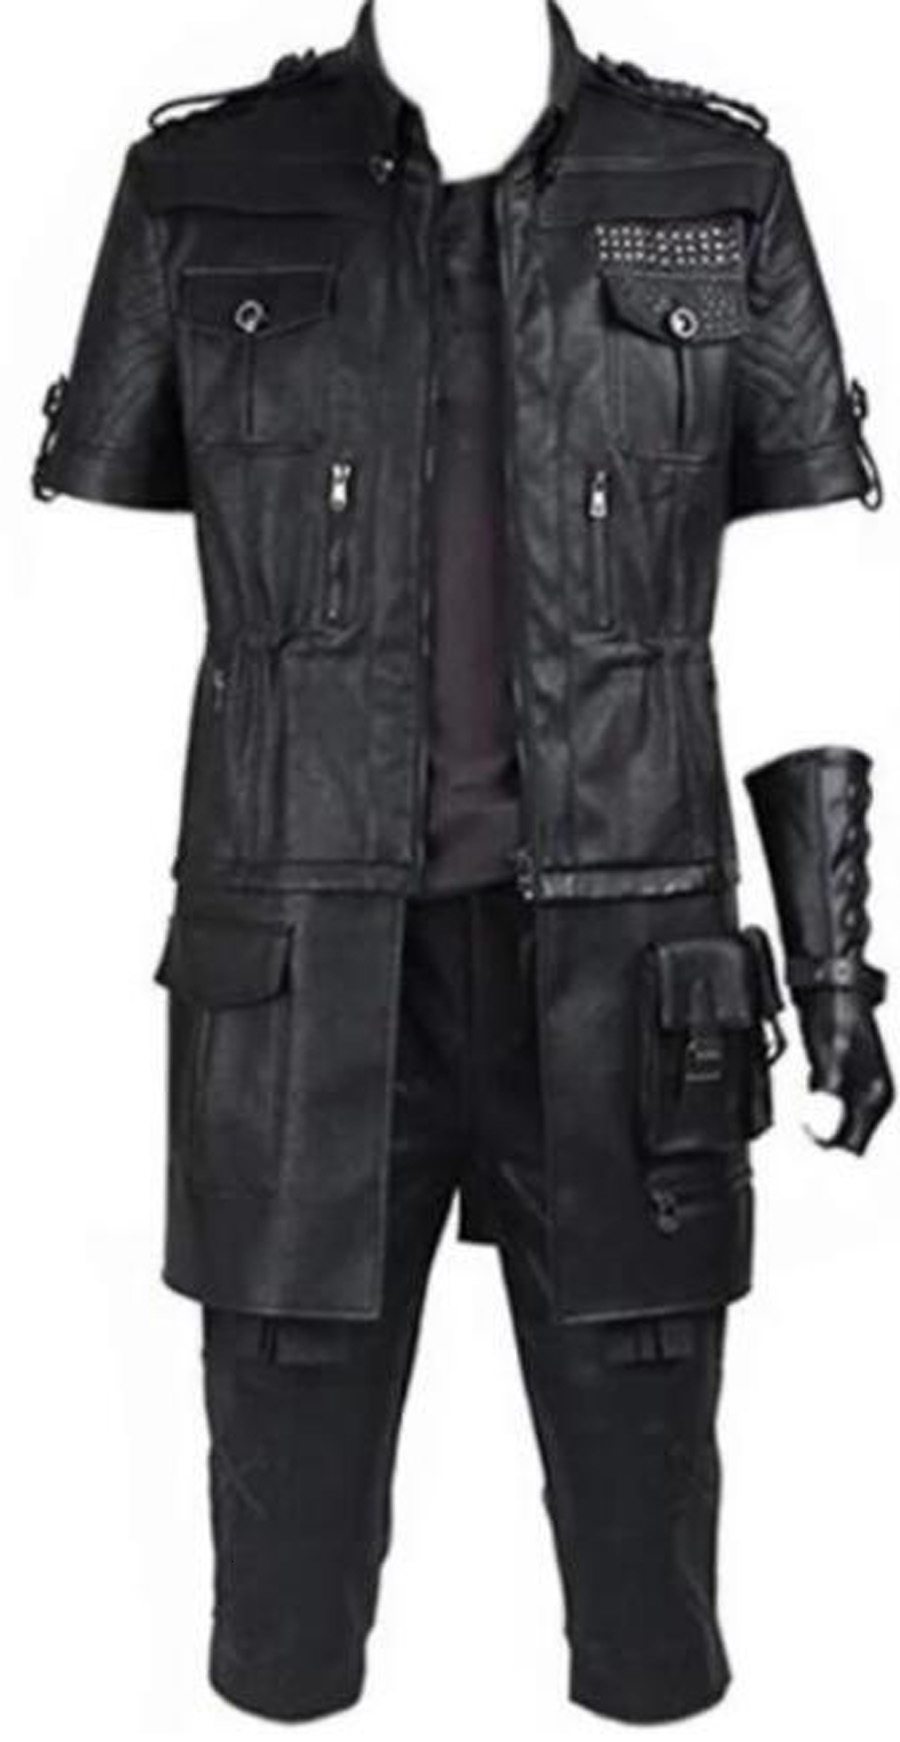 

Men's Jackets Outfit for Final Fantasy XV Noctis Lucis Caelum Cosplay uniform leather costume set outfit 230203, Mens set